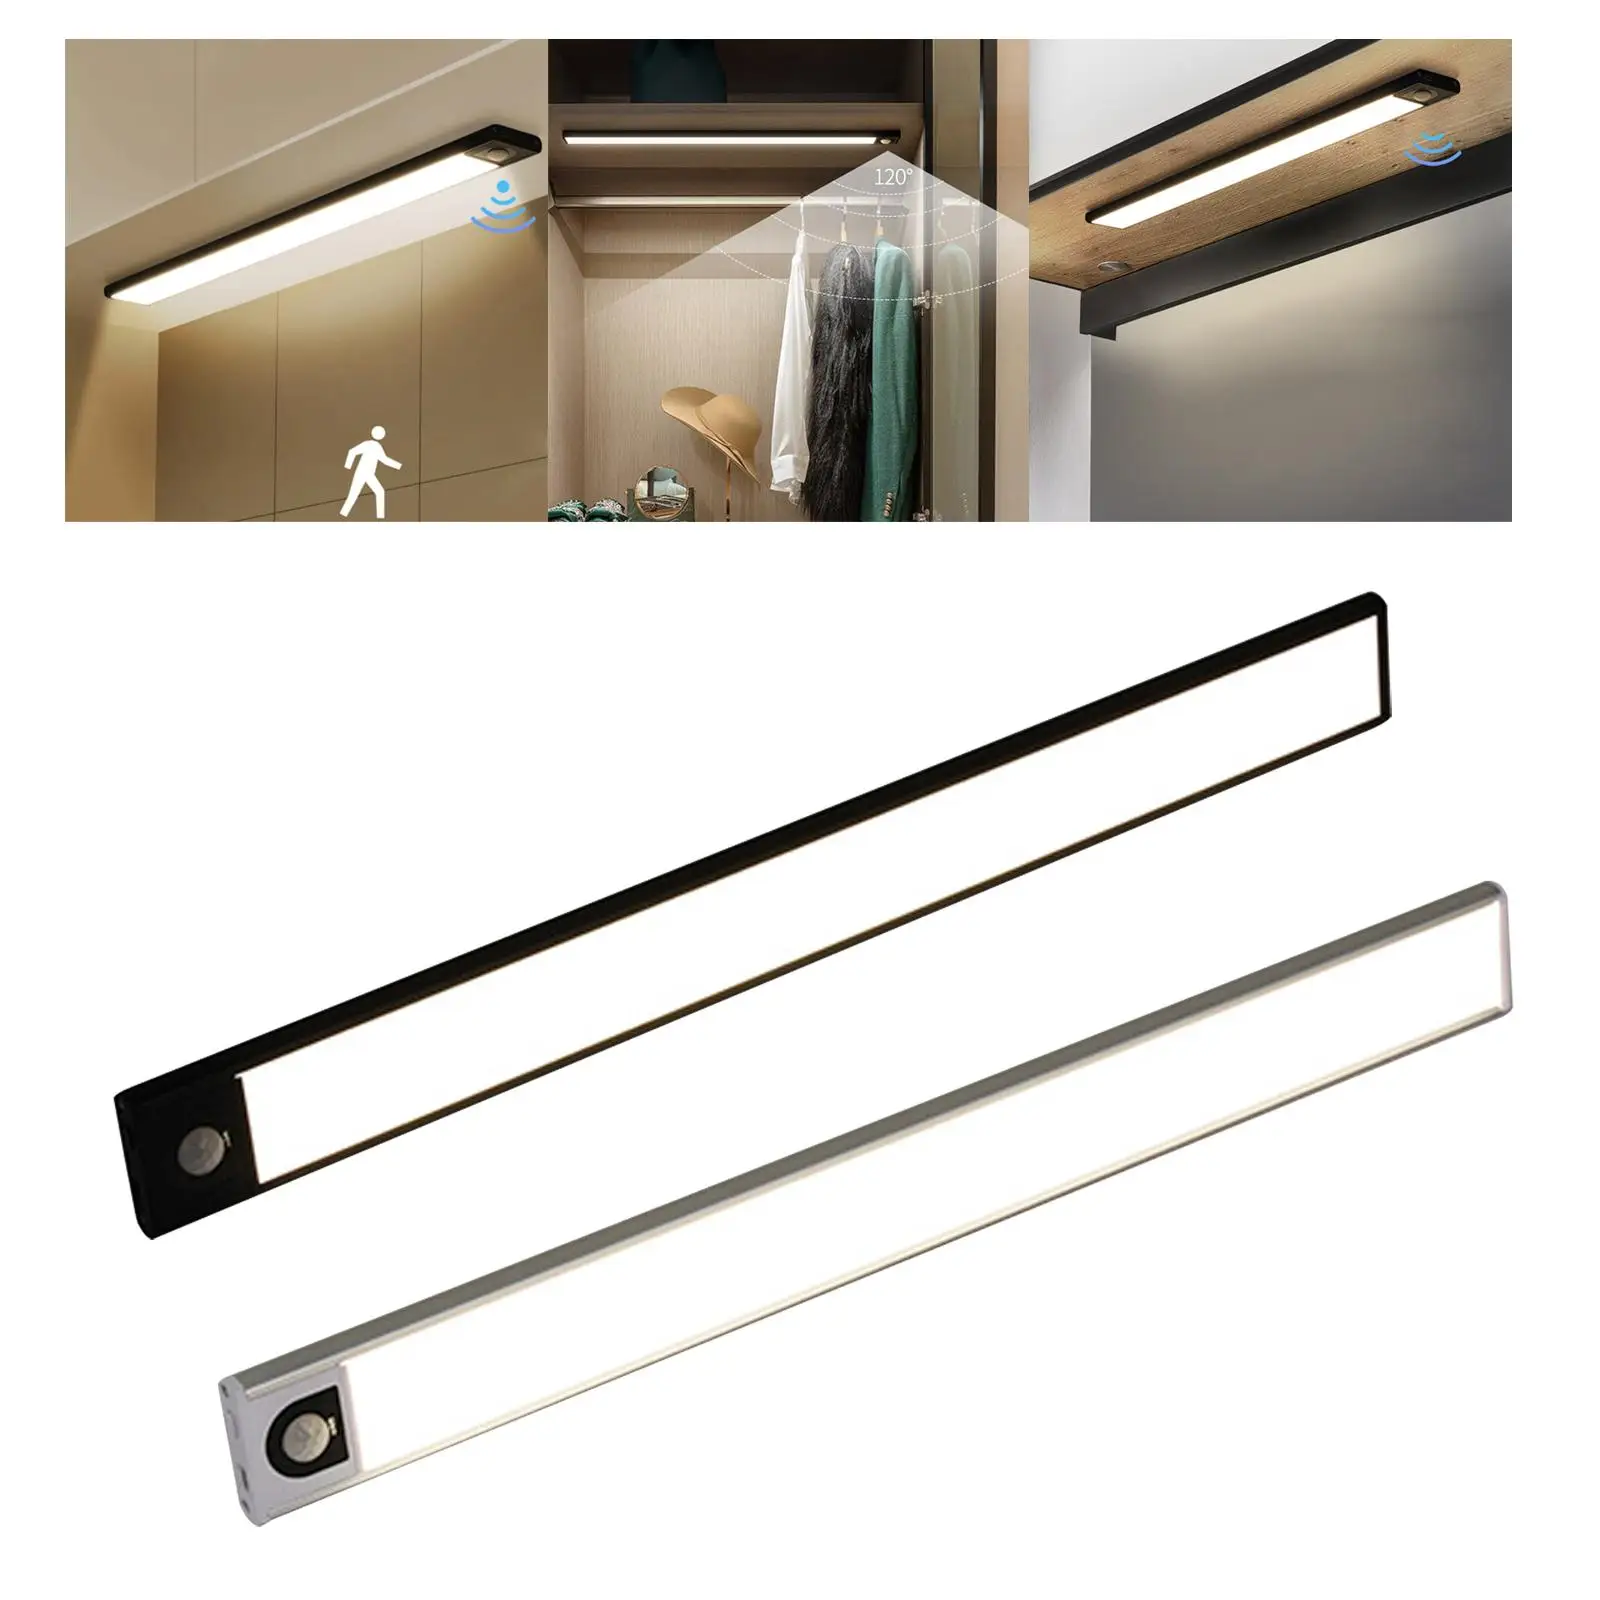 Smart Motion Sensor Light Bar USB Rechargeable Soft LED Magnetic Lamp for Kitchen Vanity Mirrors Bedrooms Wardrobe Hotel Rooms